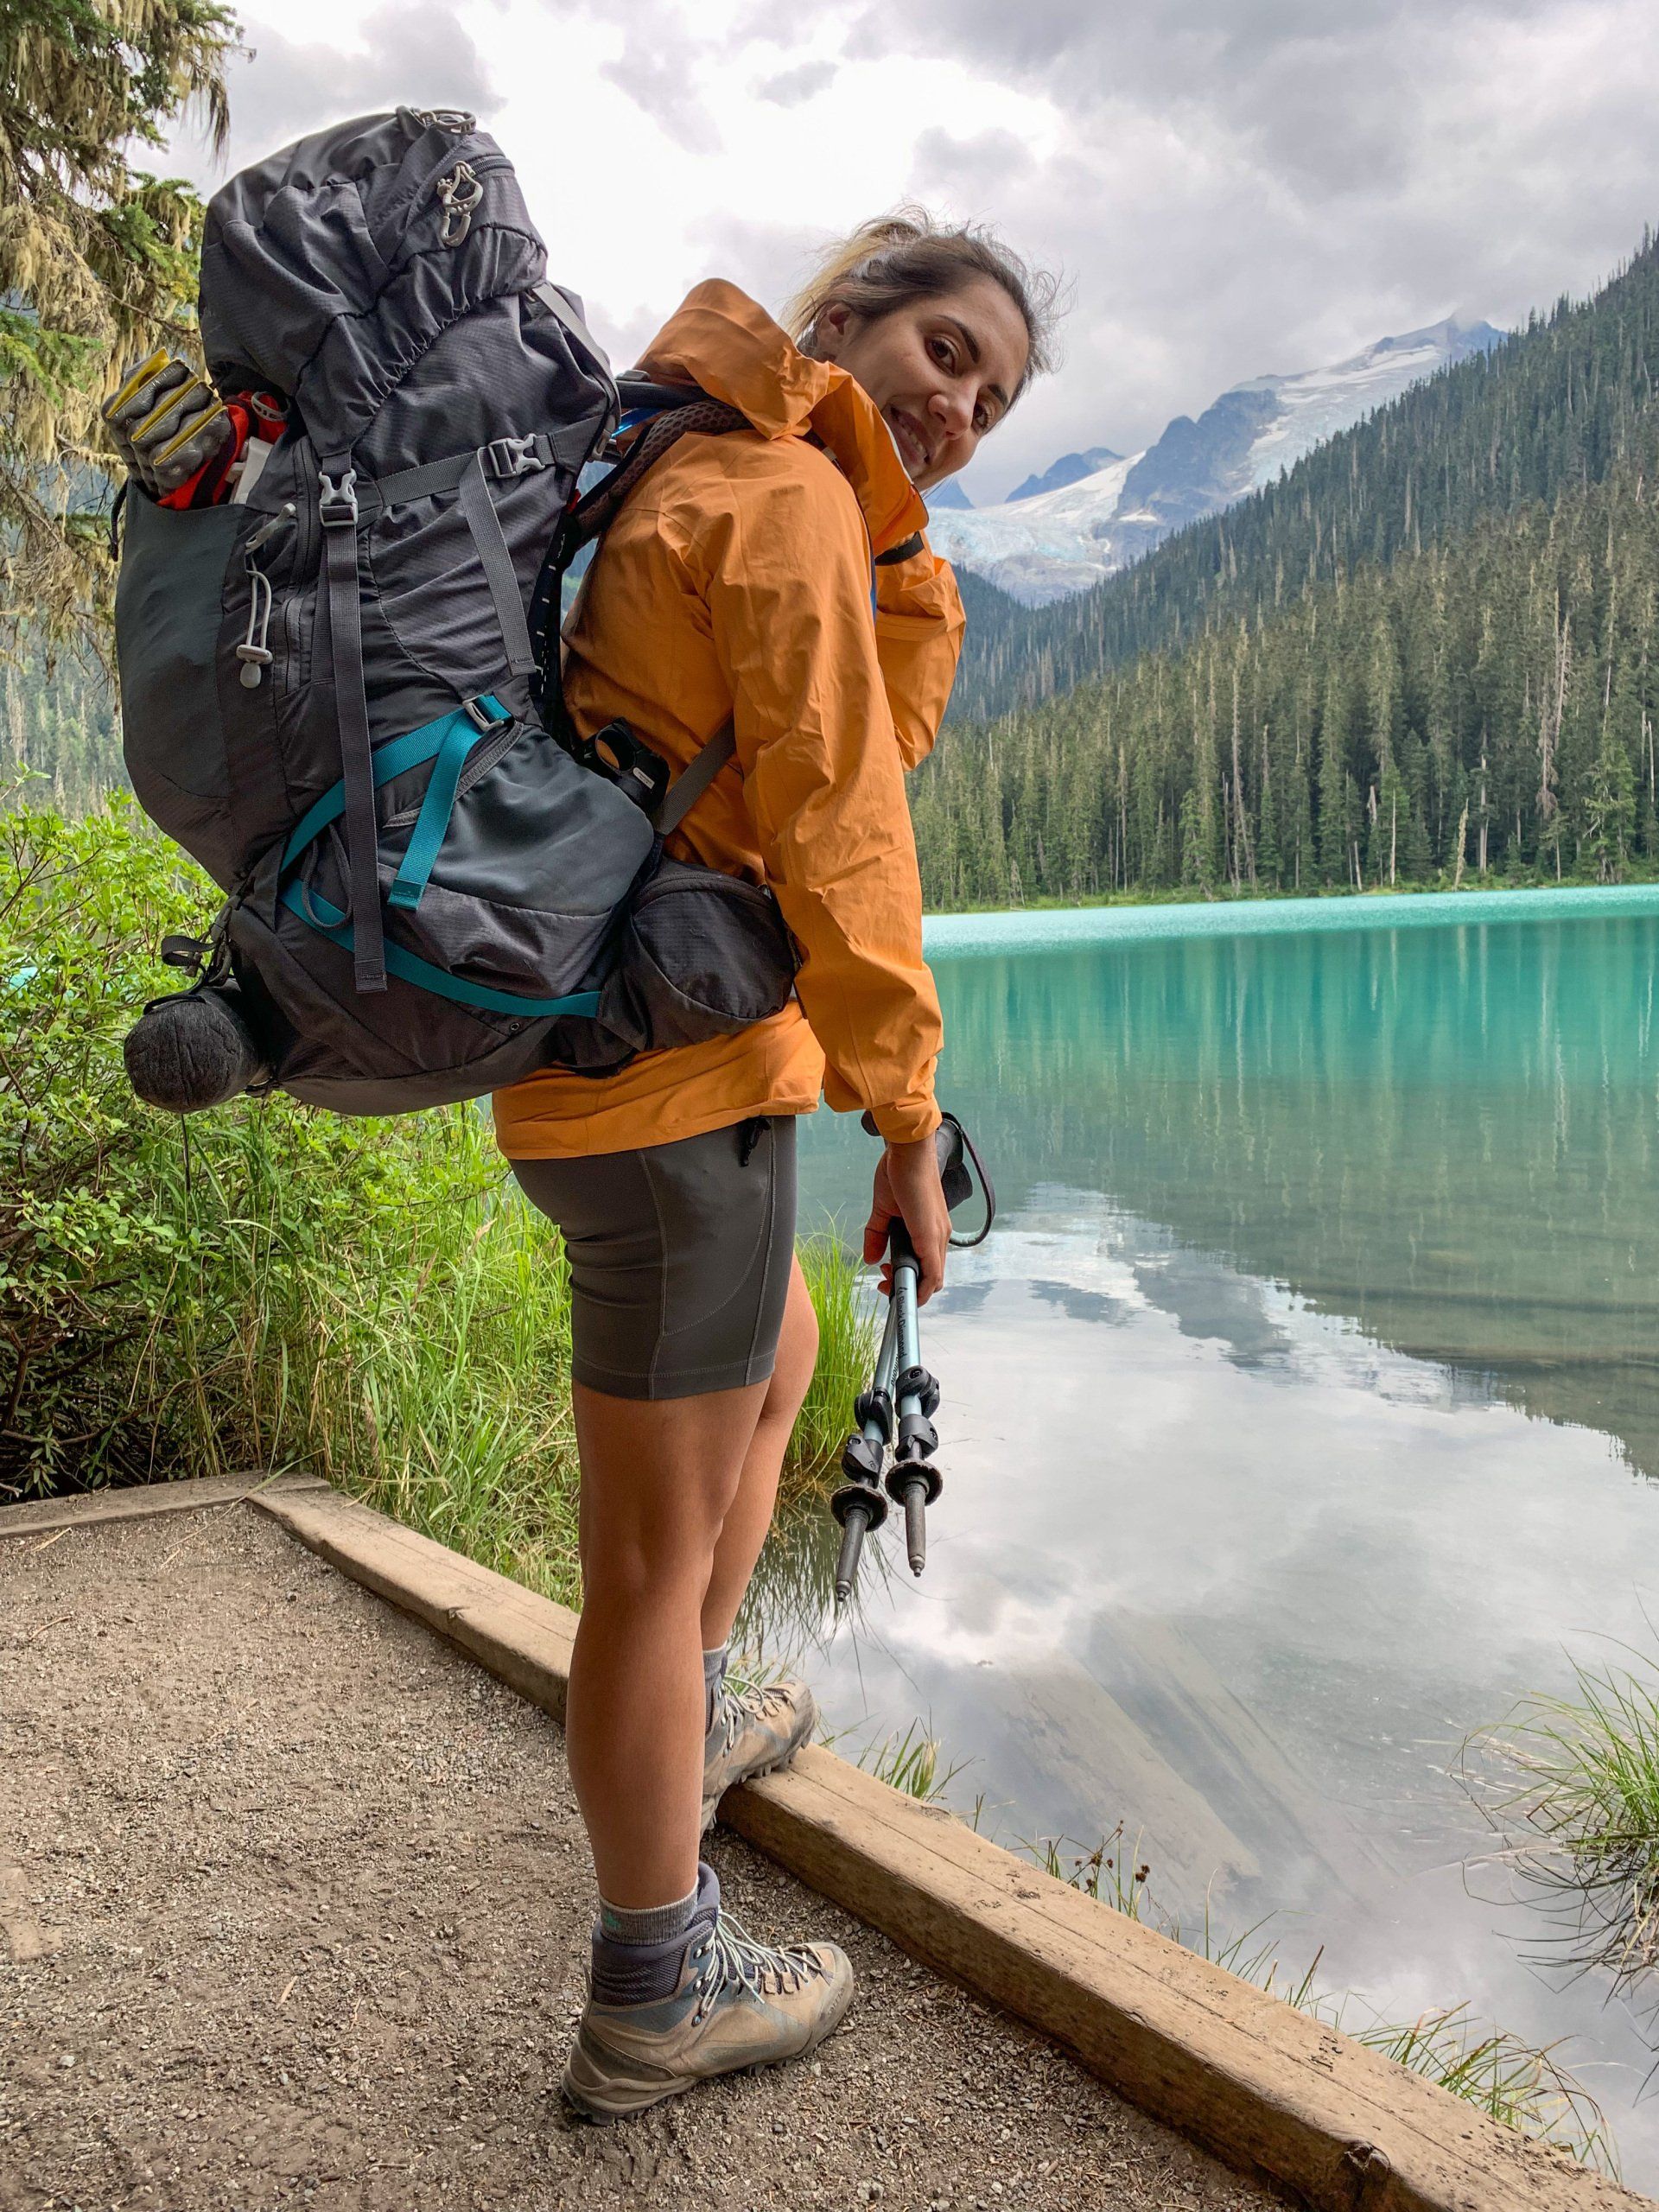 Lower Joffre lake and a female backpacker with pack full of gear, Joffre Lakes Provincial Park, BC, Canada